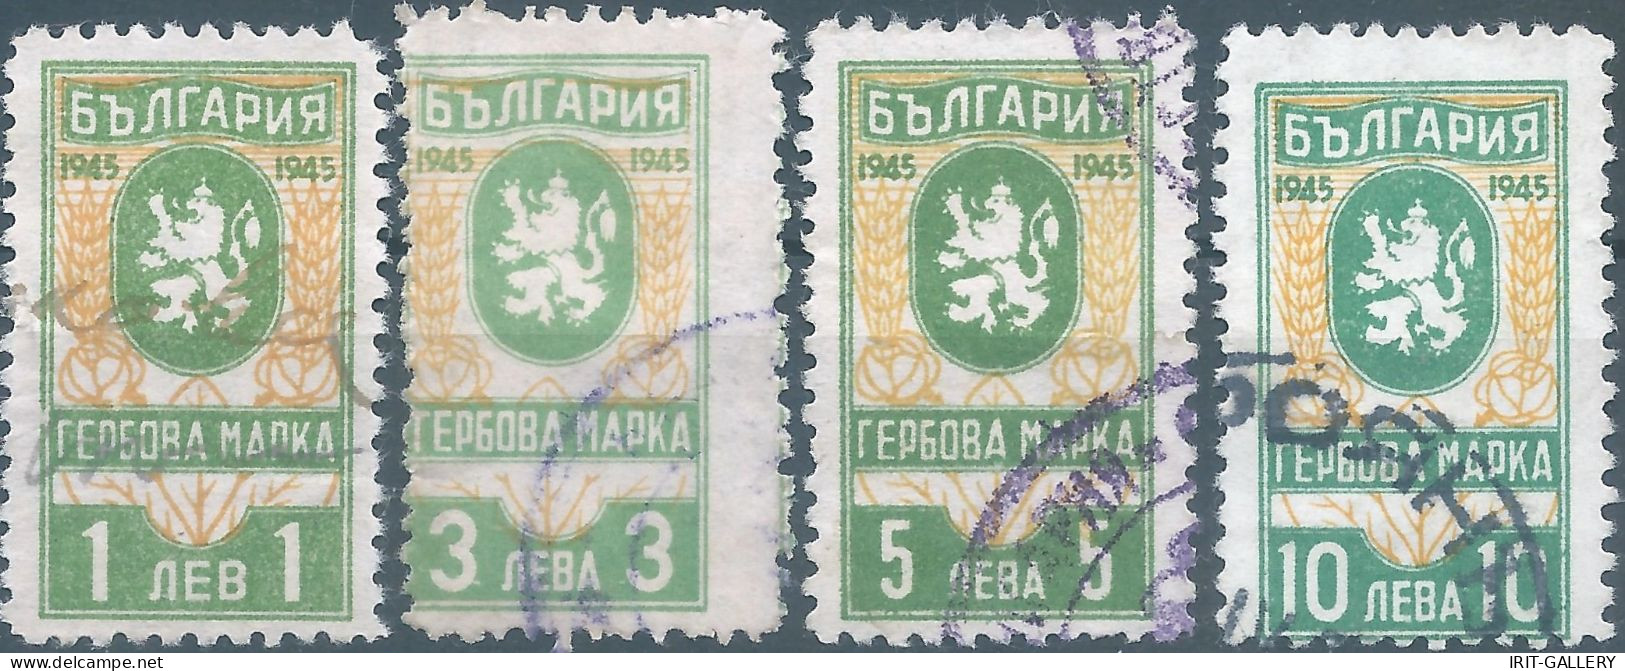 Bulgaria - Bulgarien - Bulgare,1945 Revenue Stamp Tax Fiscal,Used - Official Stamps